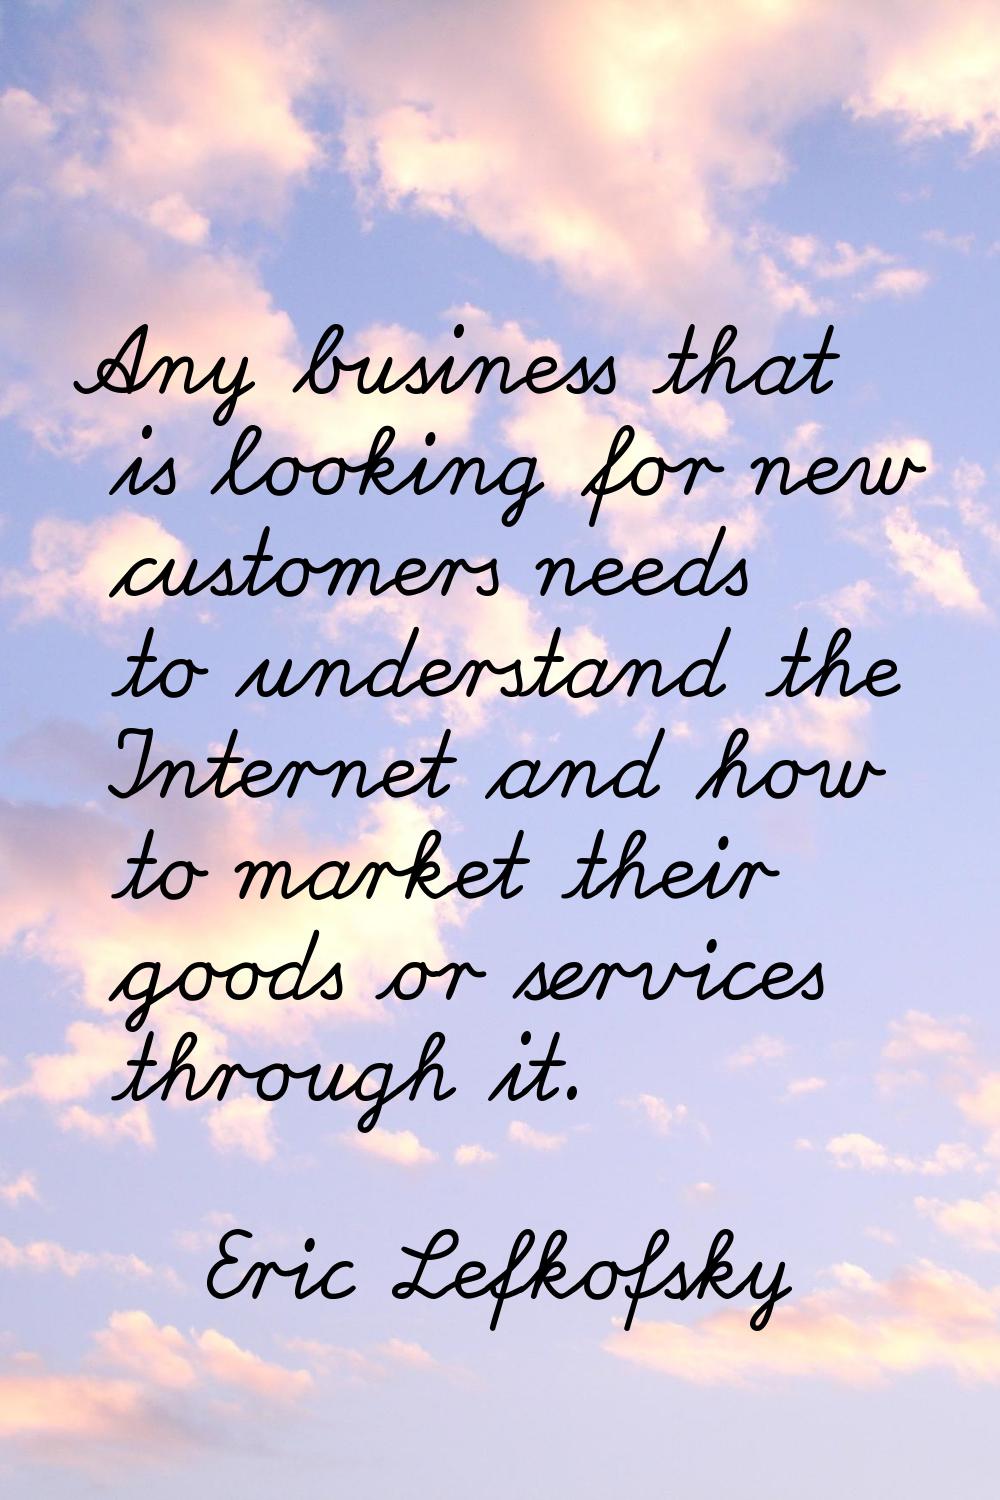 Any business that is looking for new customers needs to understand the Internet and how to market t